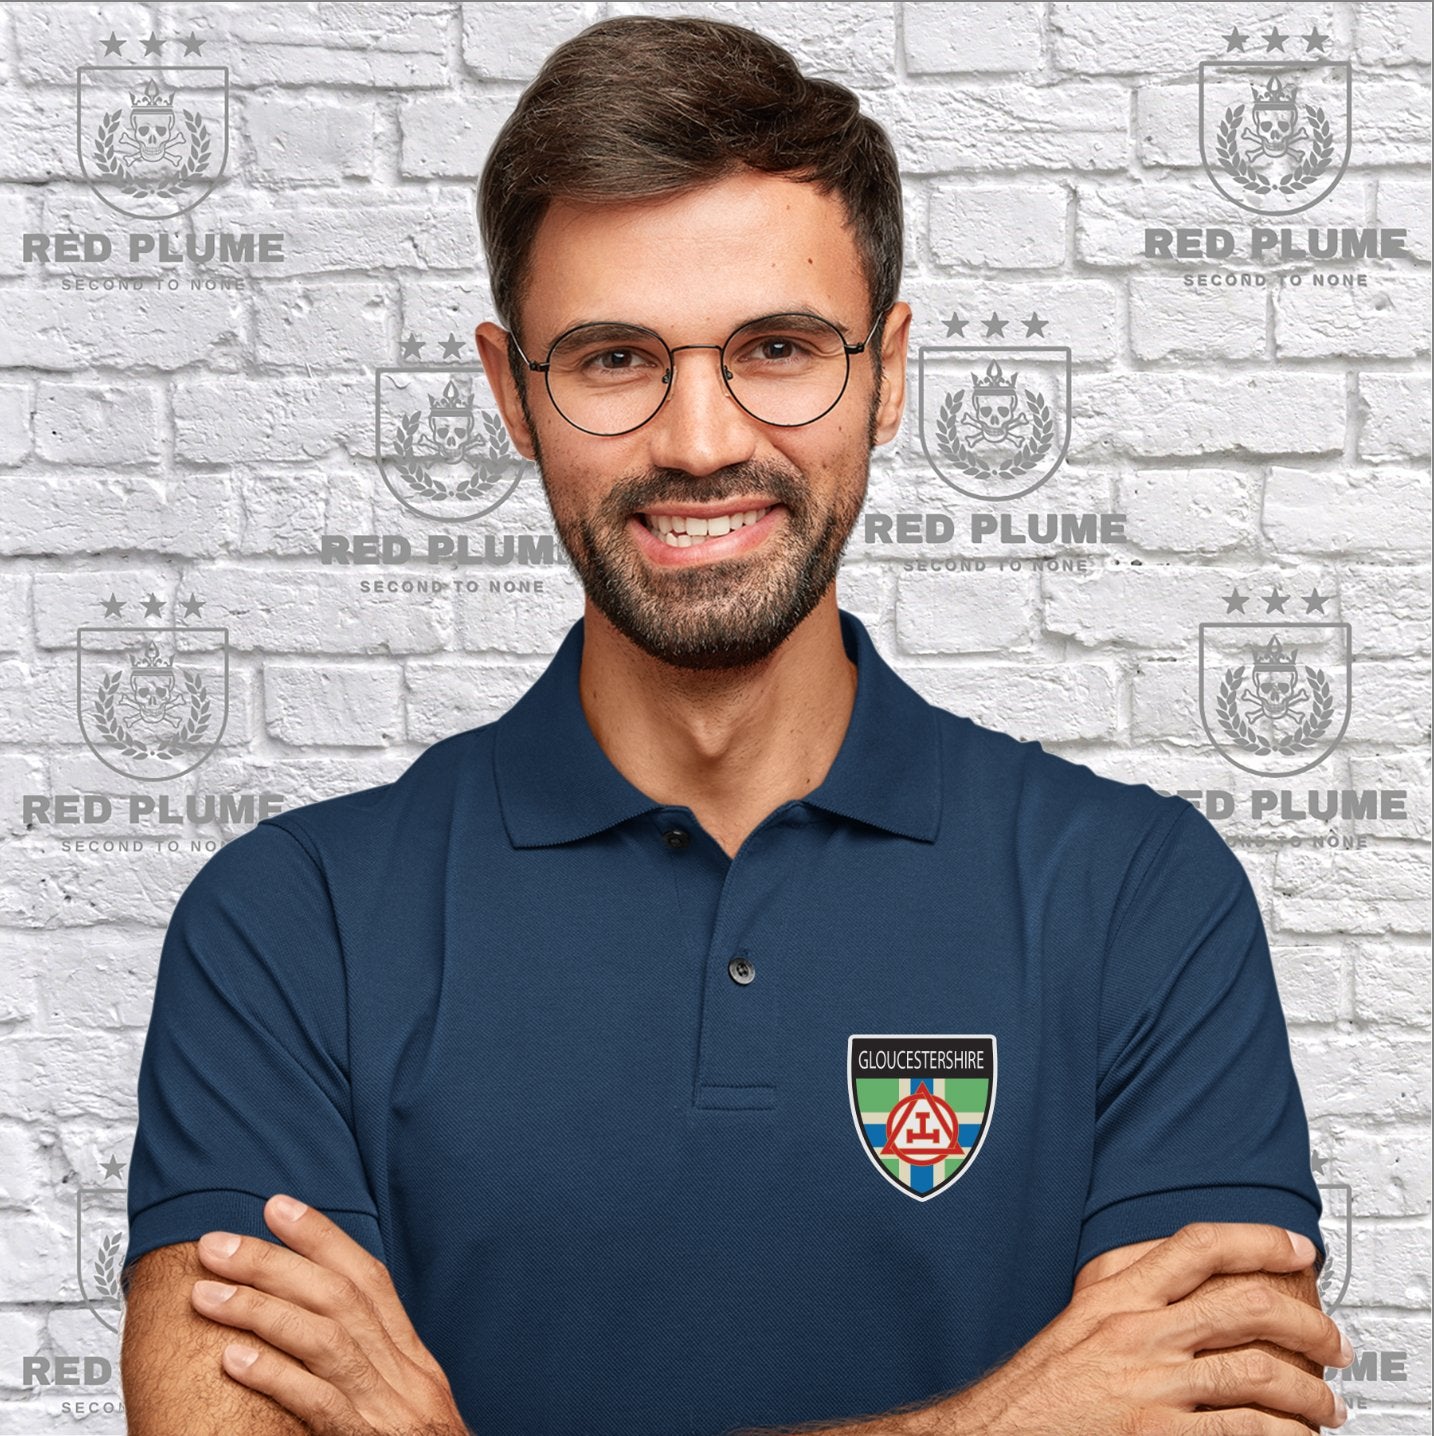 Gloucestershire Holy Royal Arch Premium Polo Shirt redplume